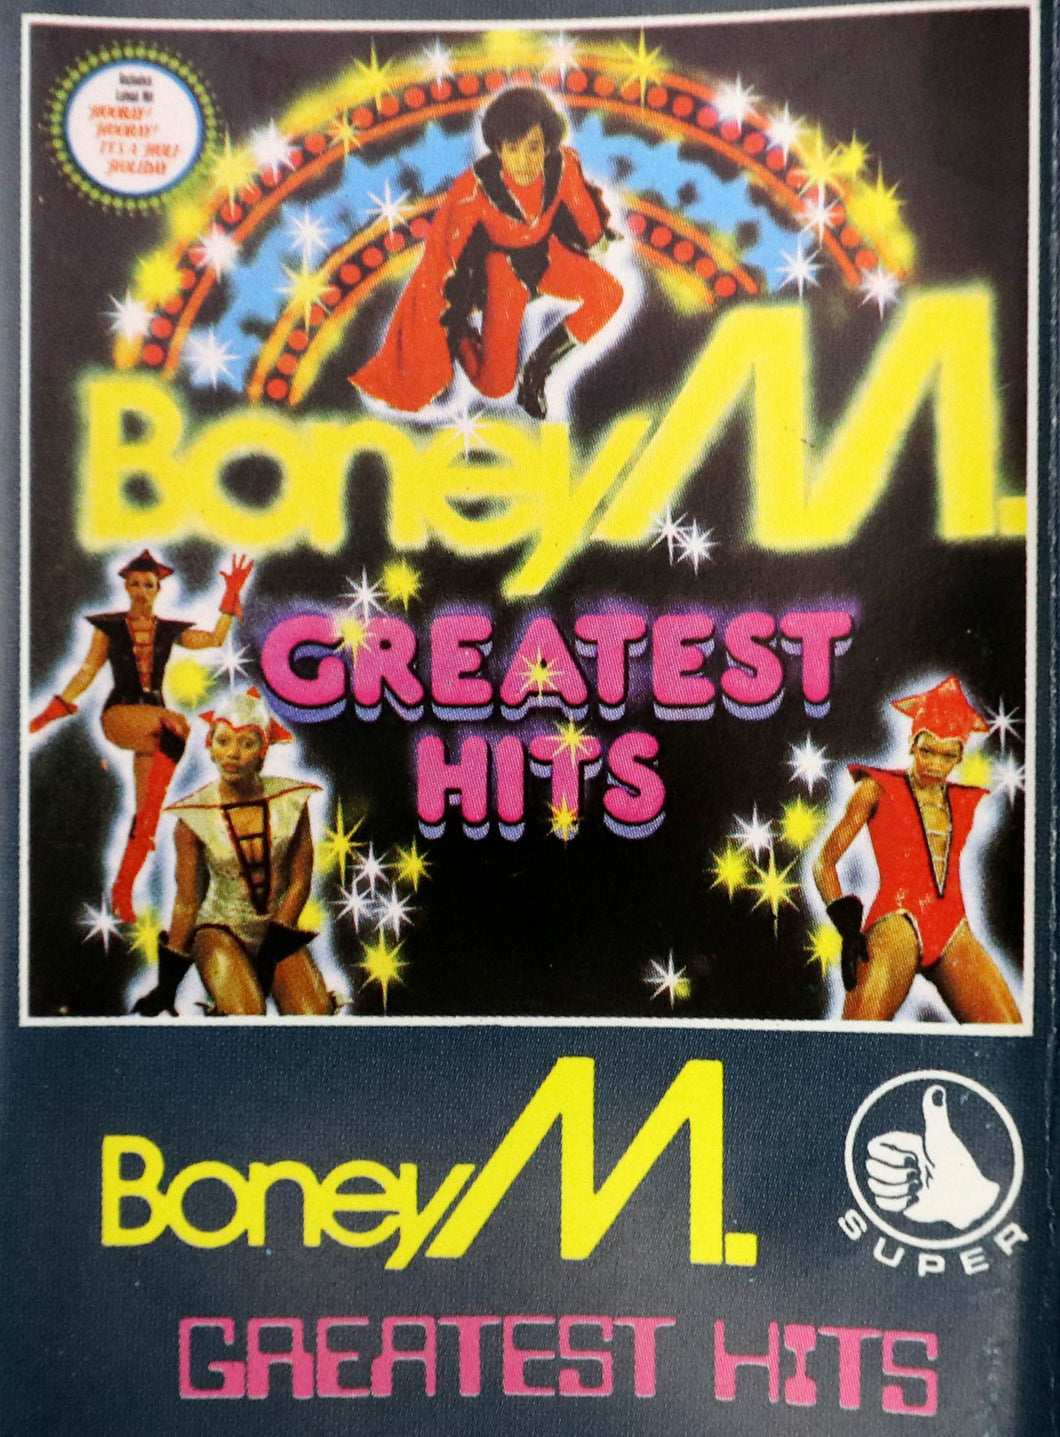 Music Cassette Tape - Disco / Funk - Boney M - Greatest Hits - Super Records - SP 2105 - VERY RARE VERSION - Impossible to find this version!